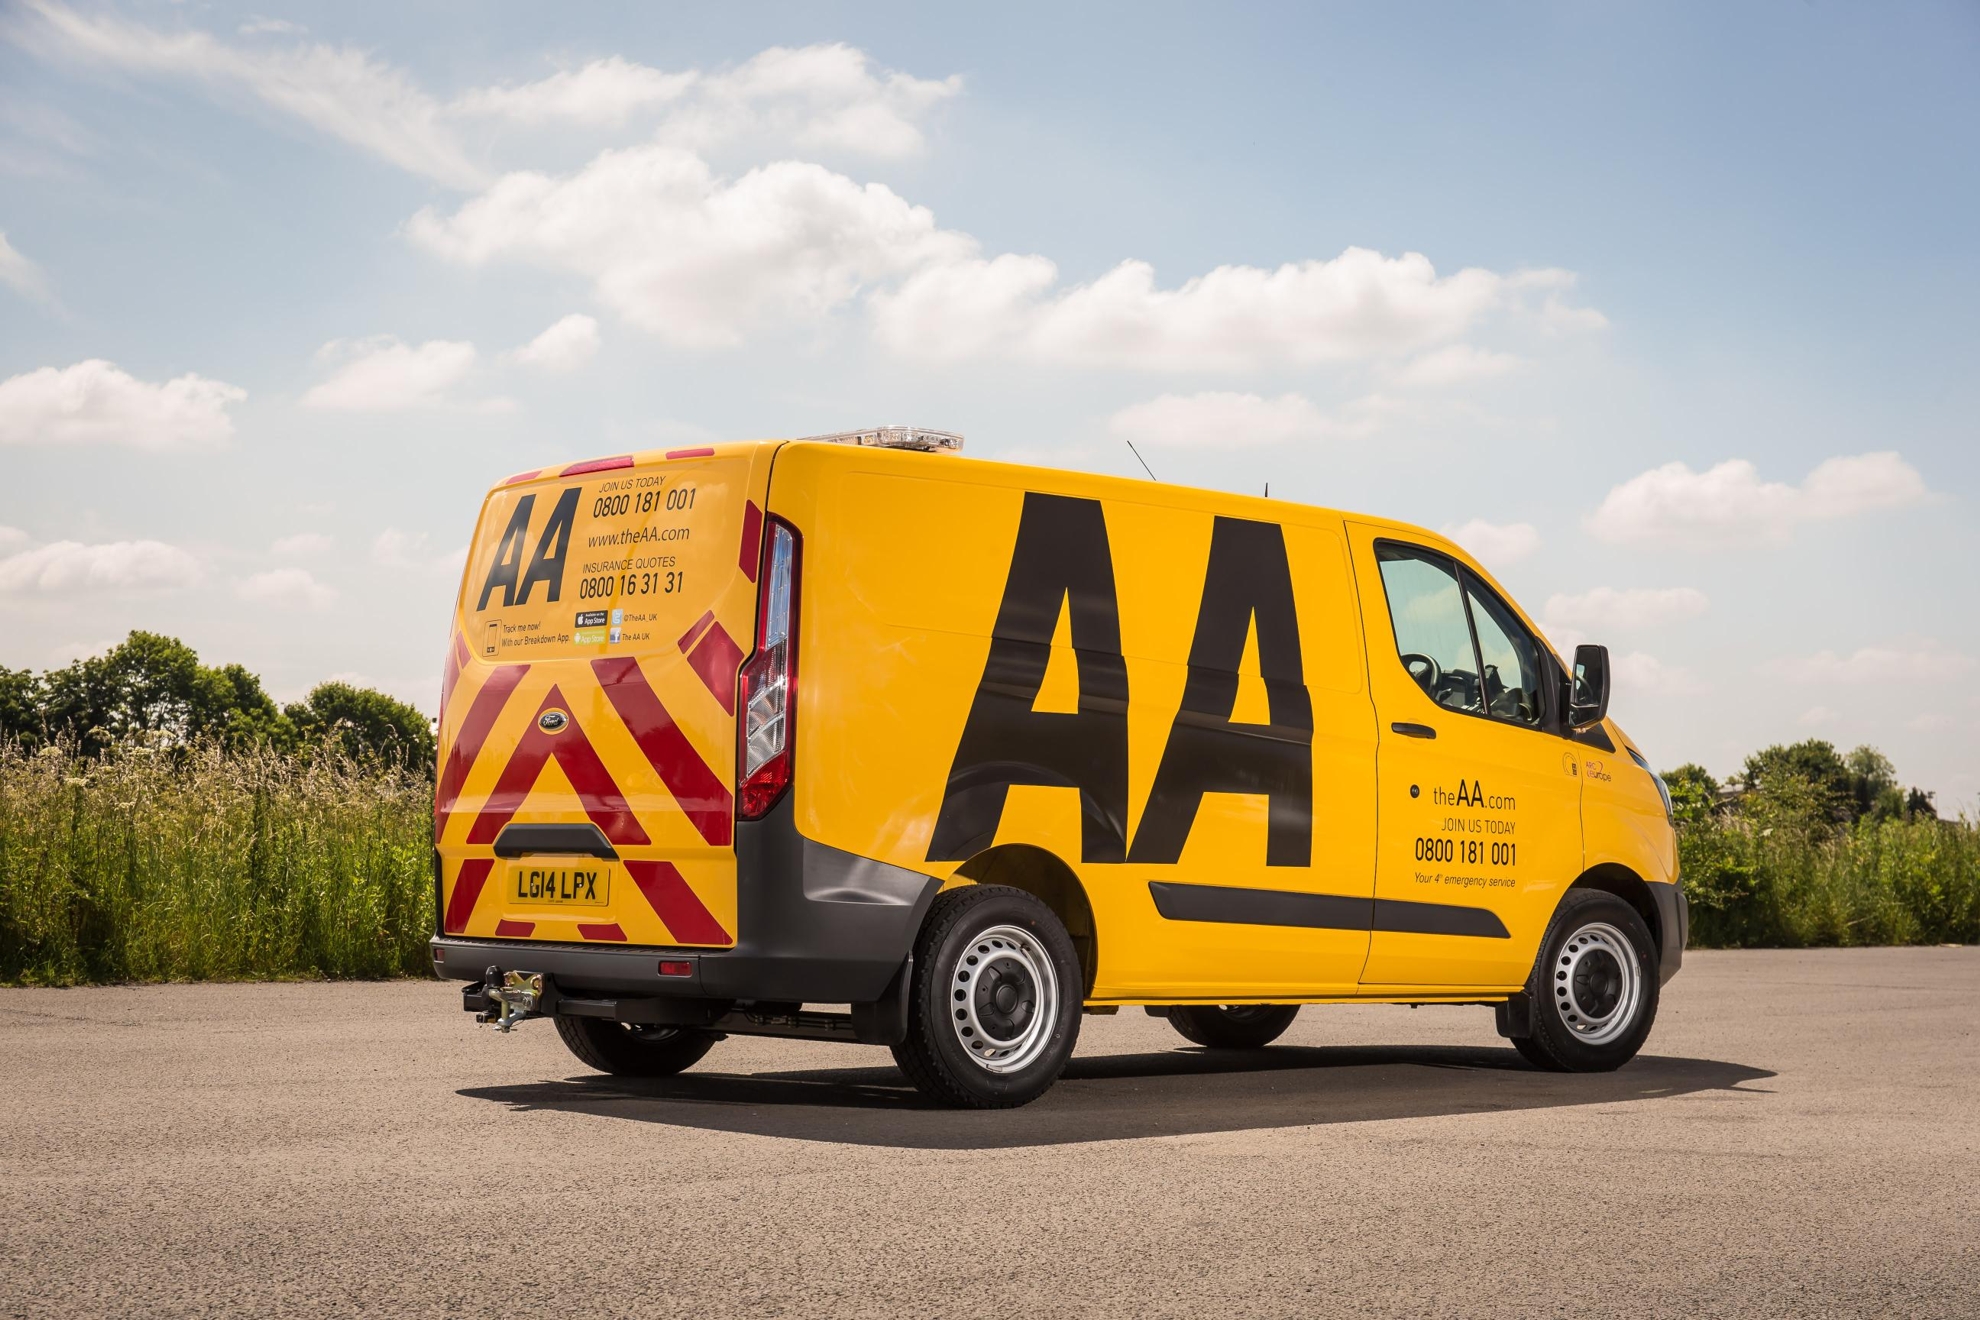 FORD TRANSIT ON PATROL WITH THE AA